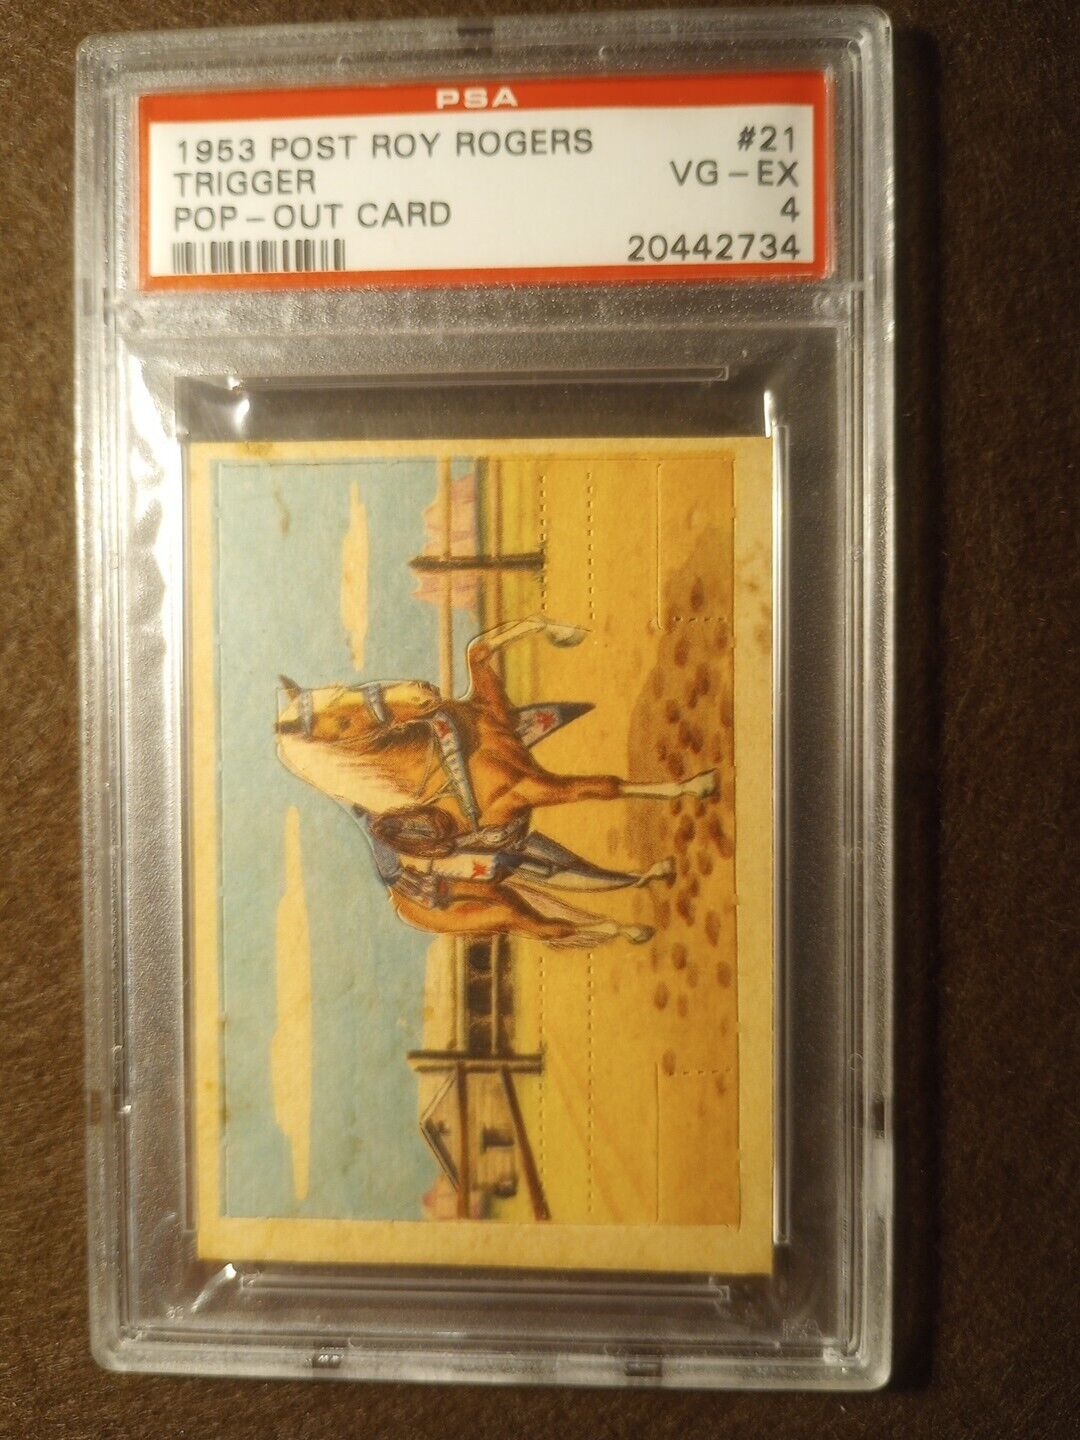 1953 Post Roy Rogers Trigger #21